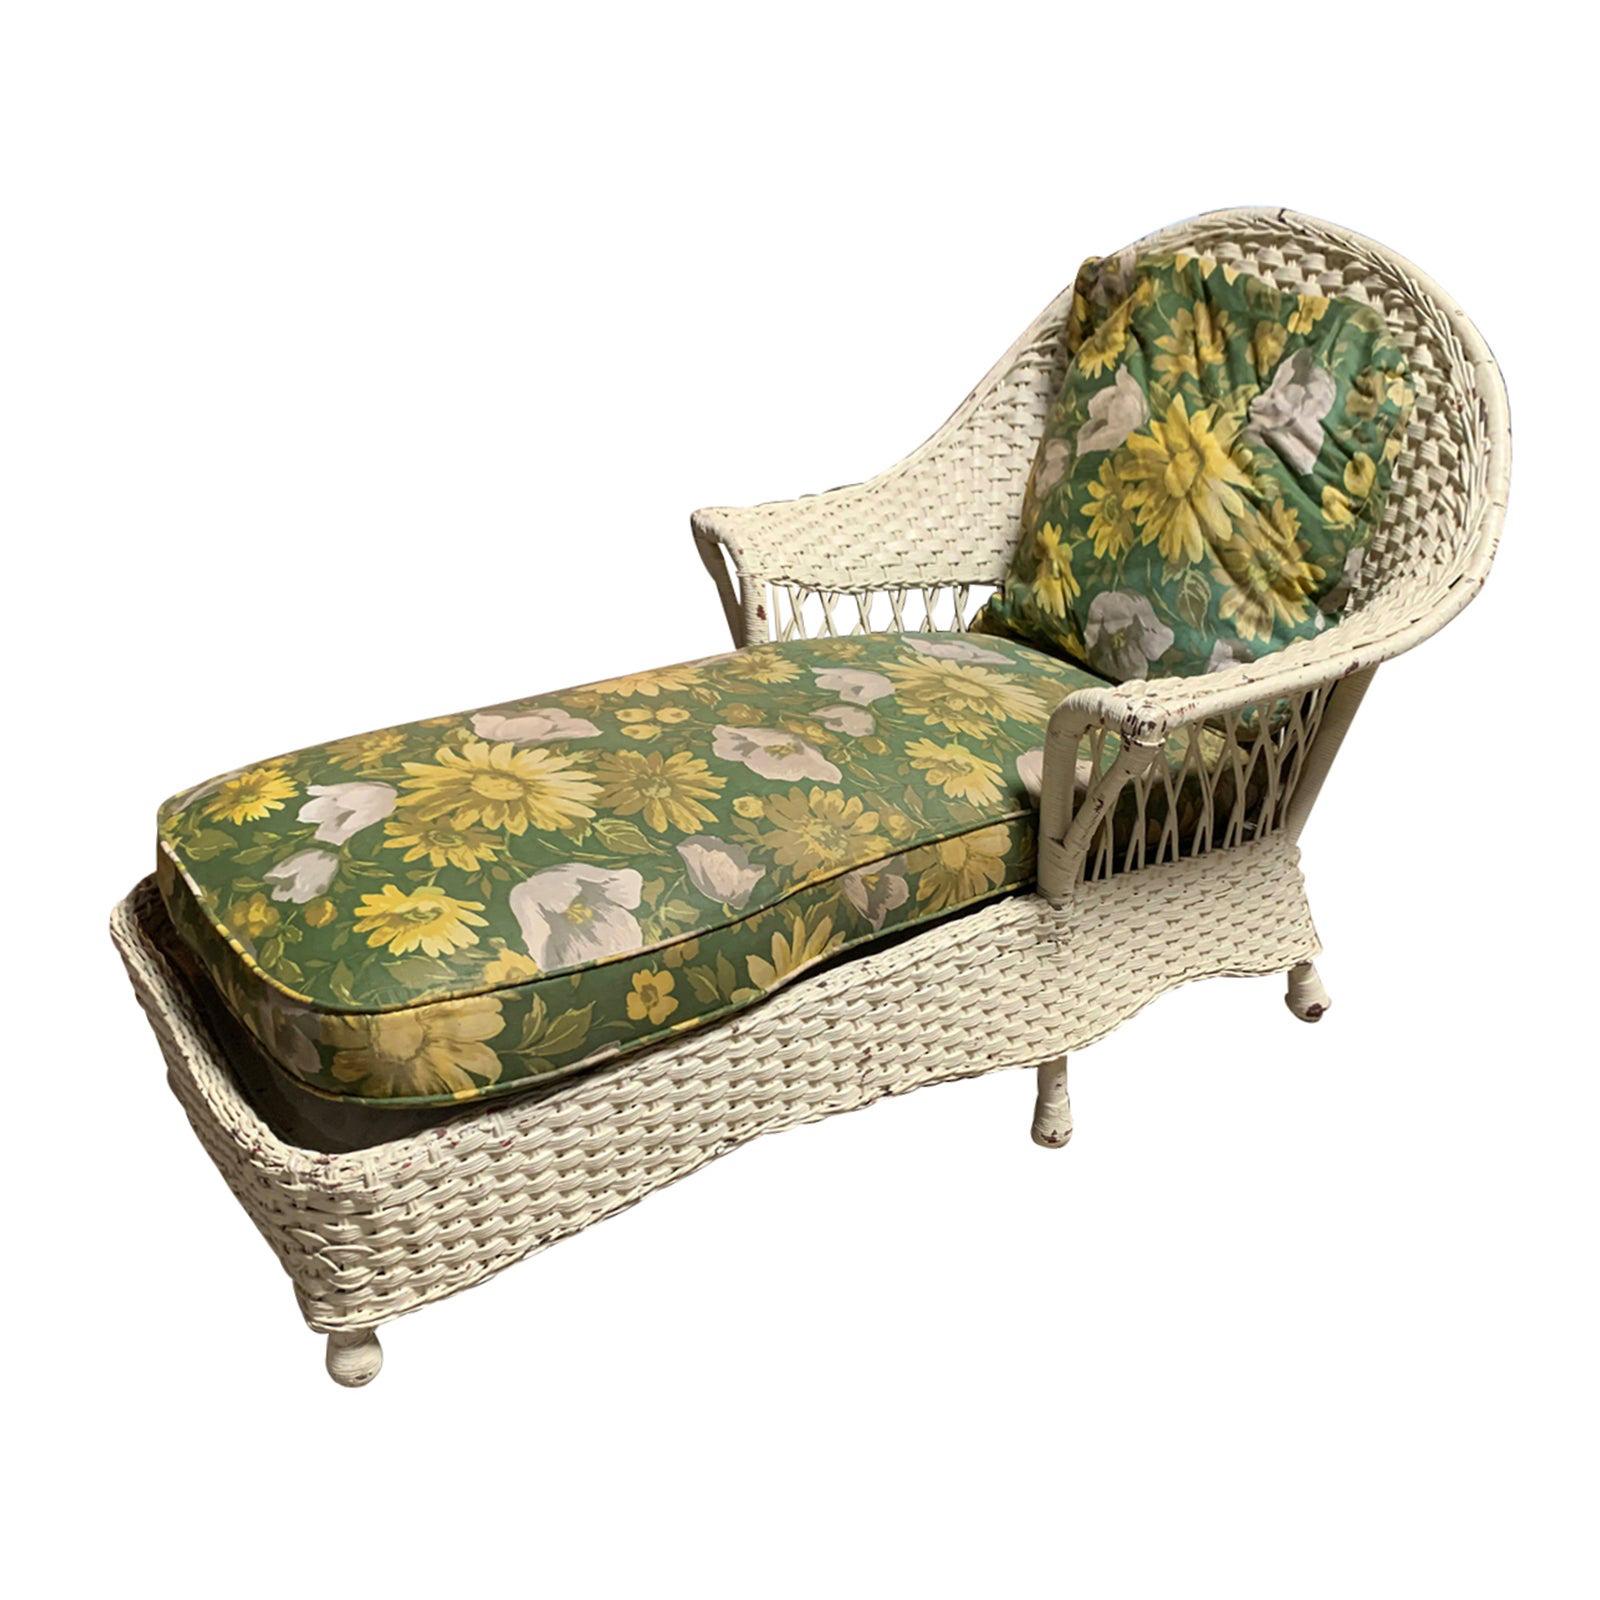 Early 20th Century Wicker Chaise with Green Floral Upholstery and Pillow